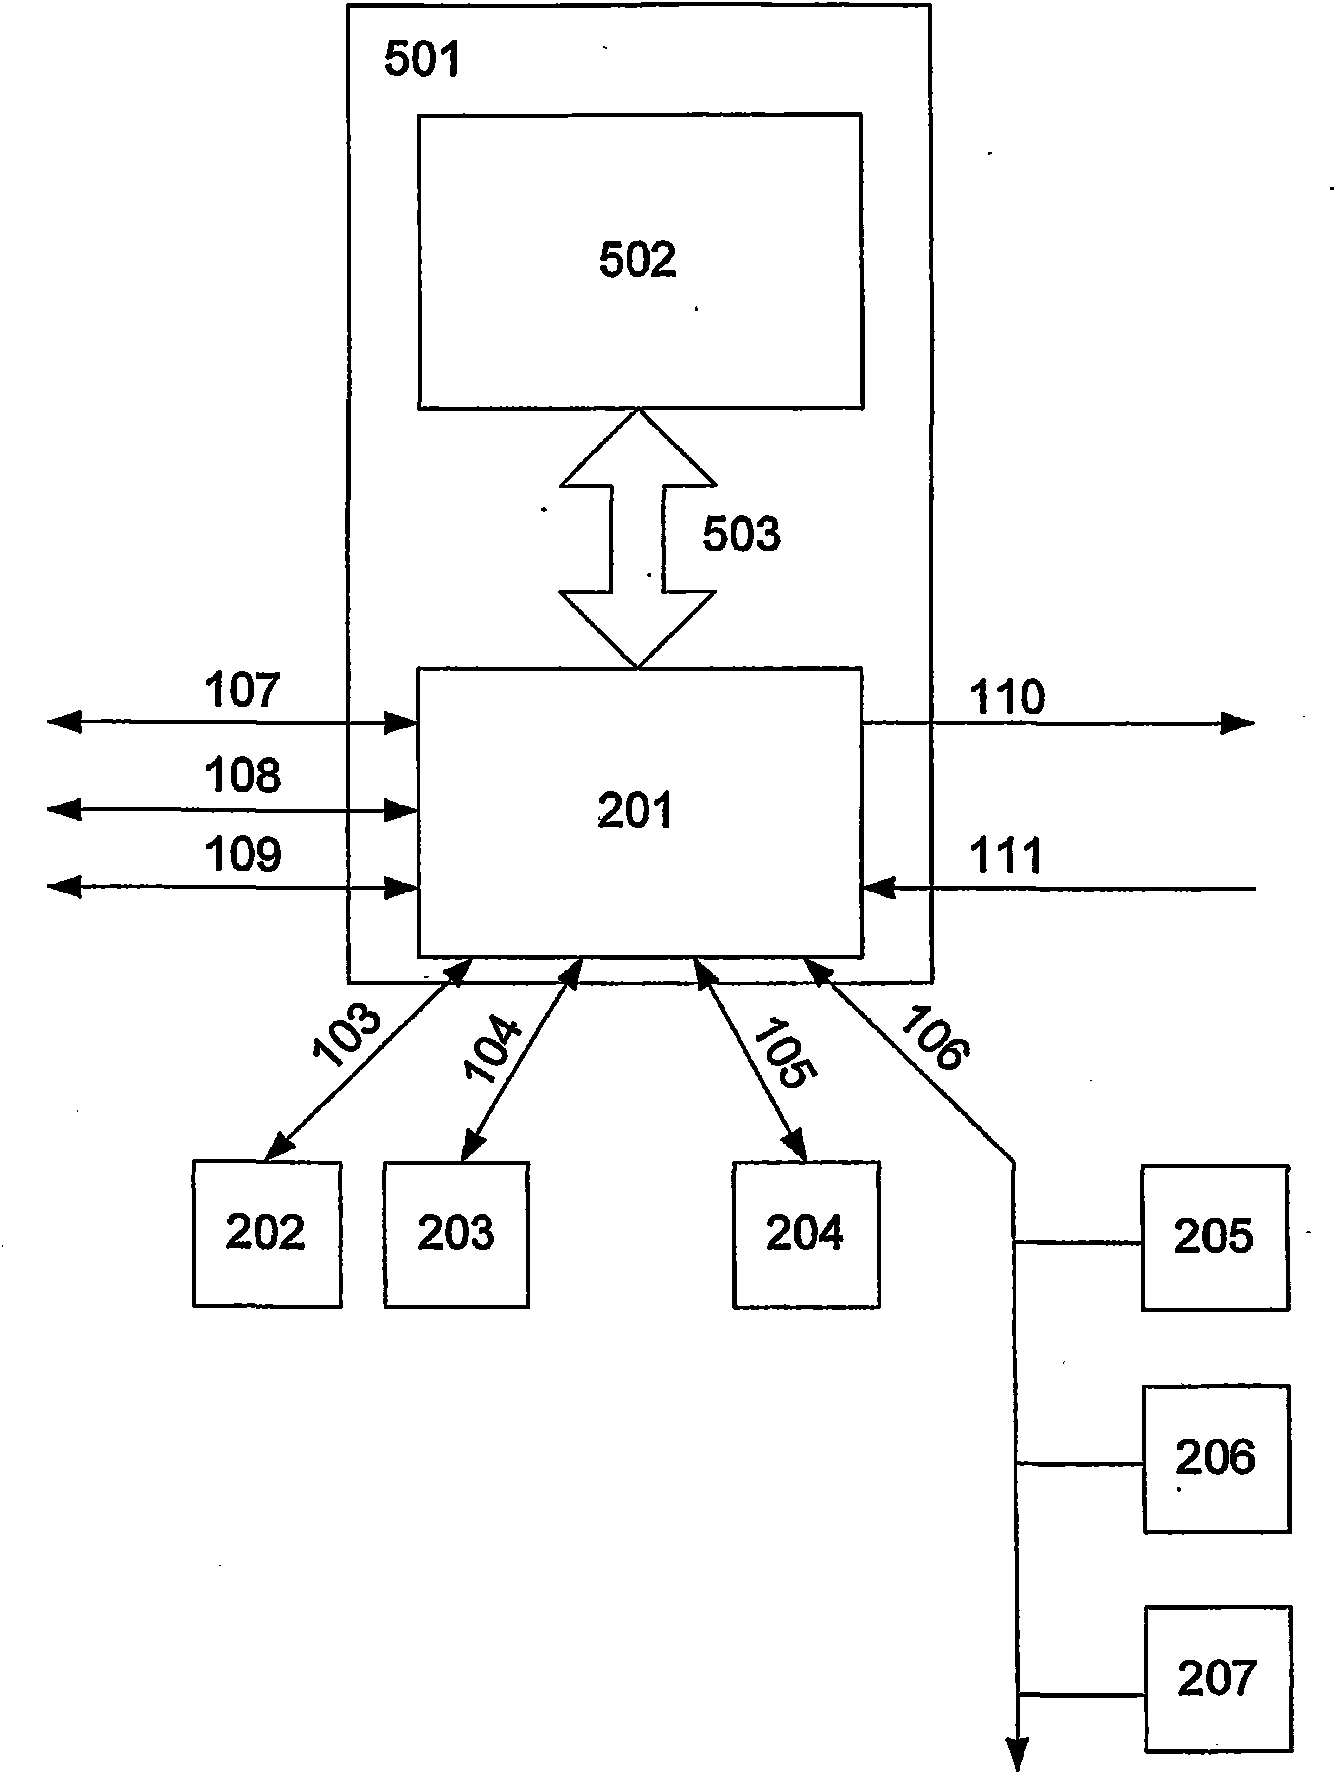 Method for switching from a distributed principle to a master-slave principle in a network